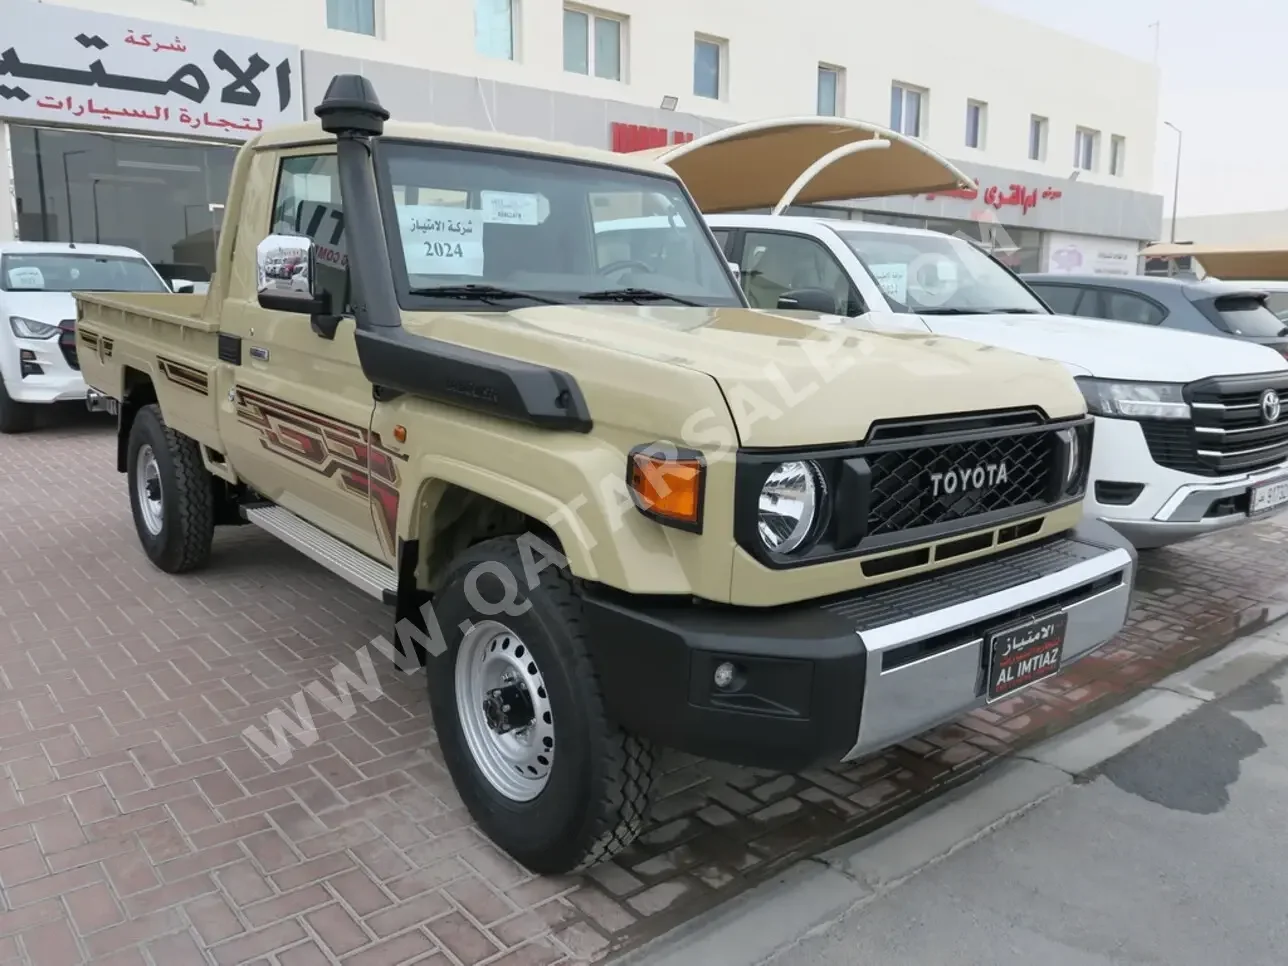 Toyota  Land Cruiser  LX  2024  Manual  0 Km  8 Cylinder  Four Wheel Drive (4WD)  Pick Up  Beige  With Warranty